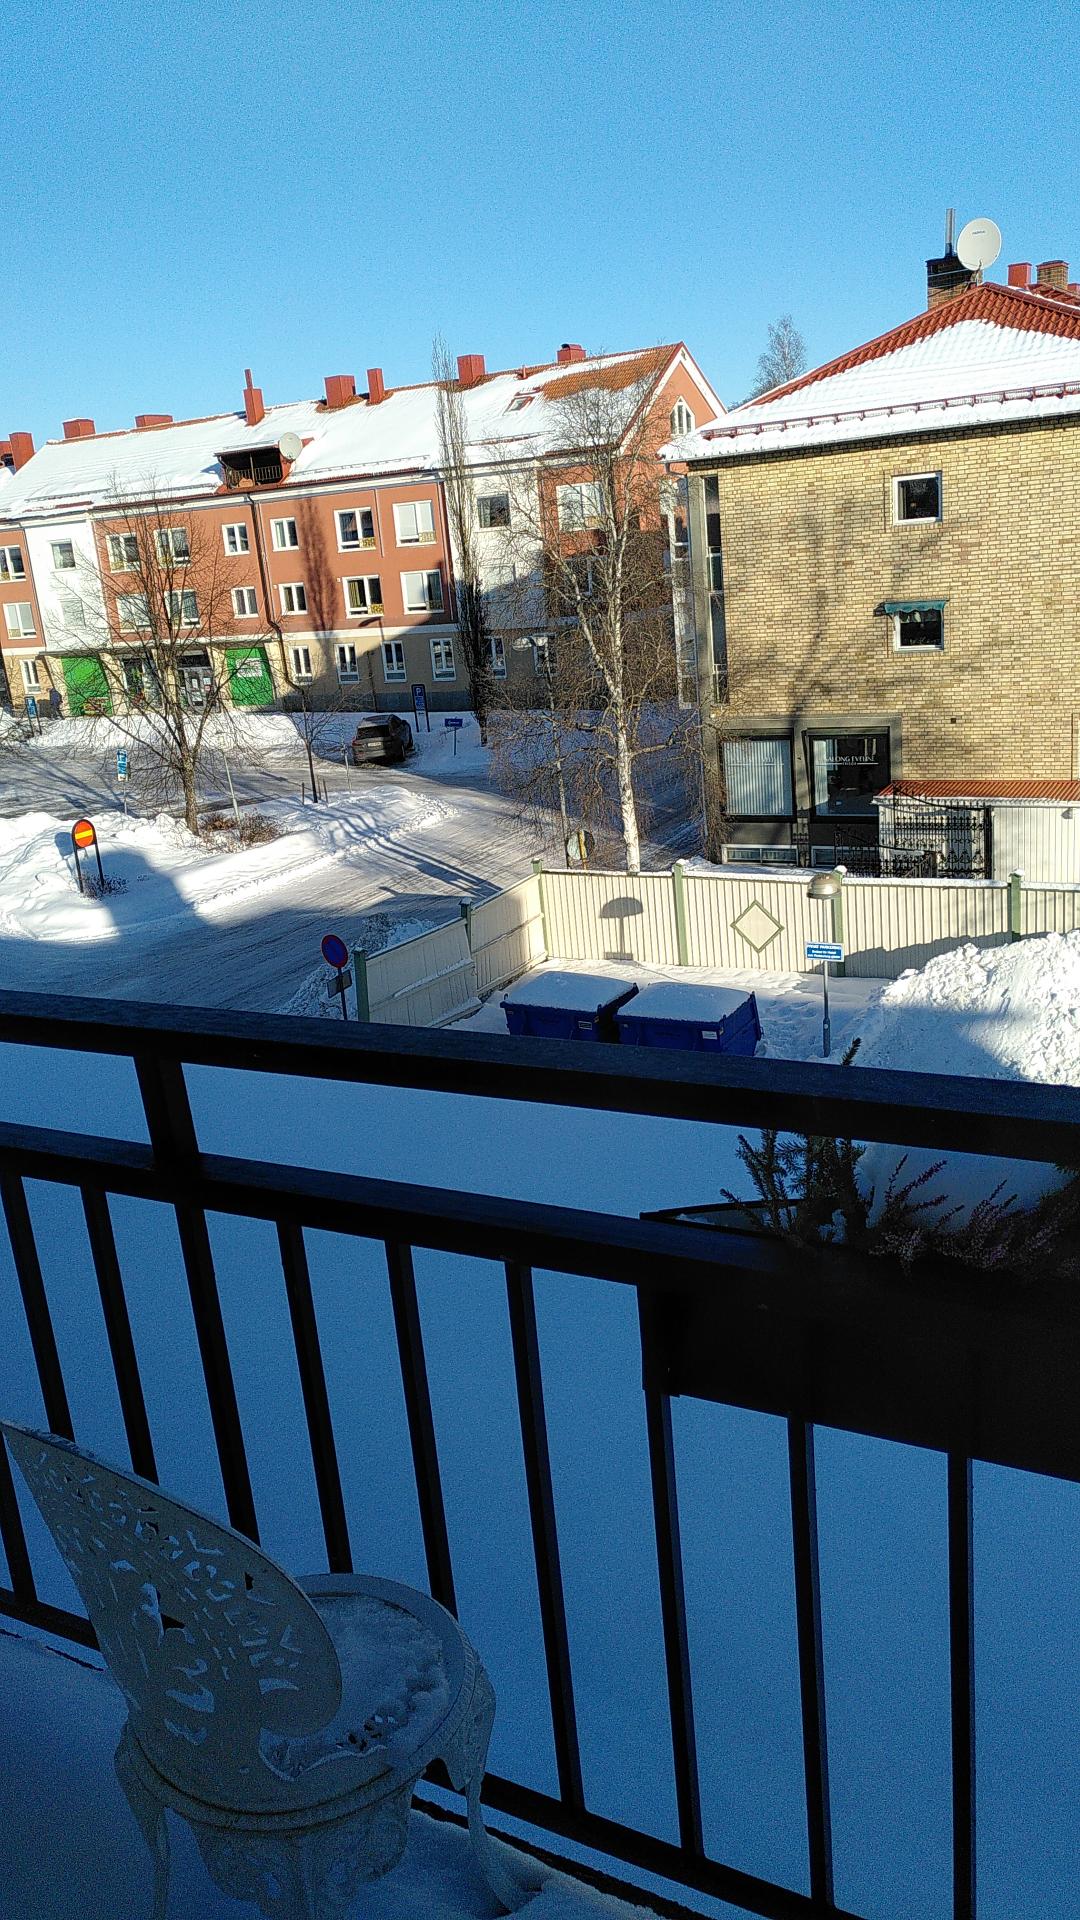 Parts of a balcony, snowy back yard, and a few multi-story houses with snow on the roofs.